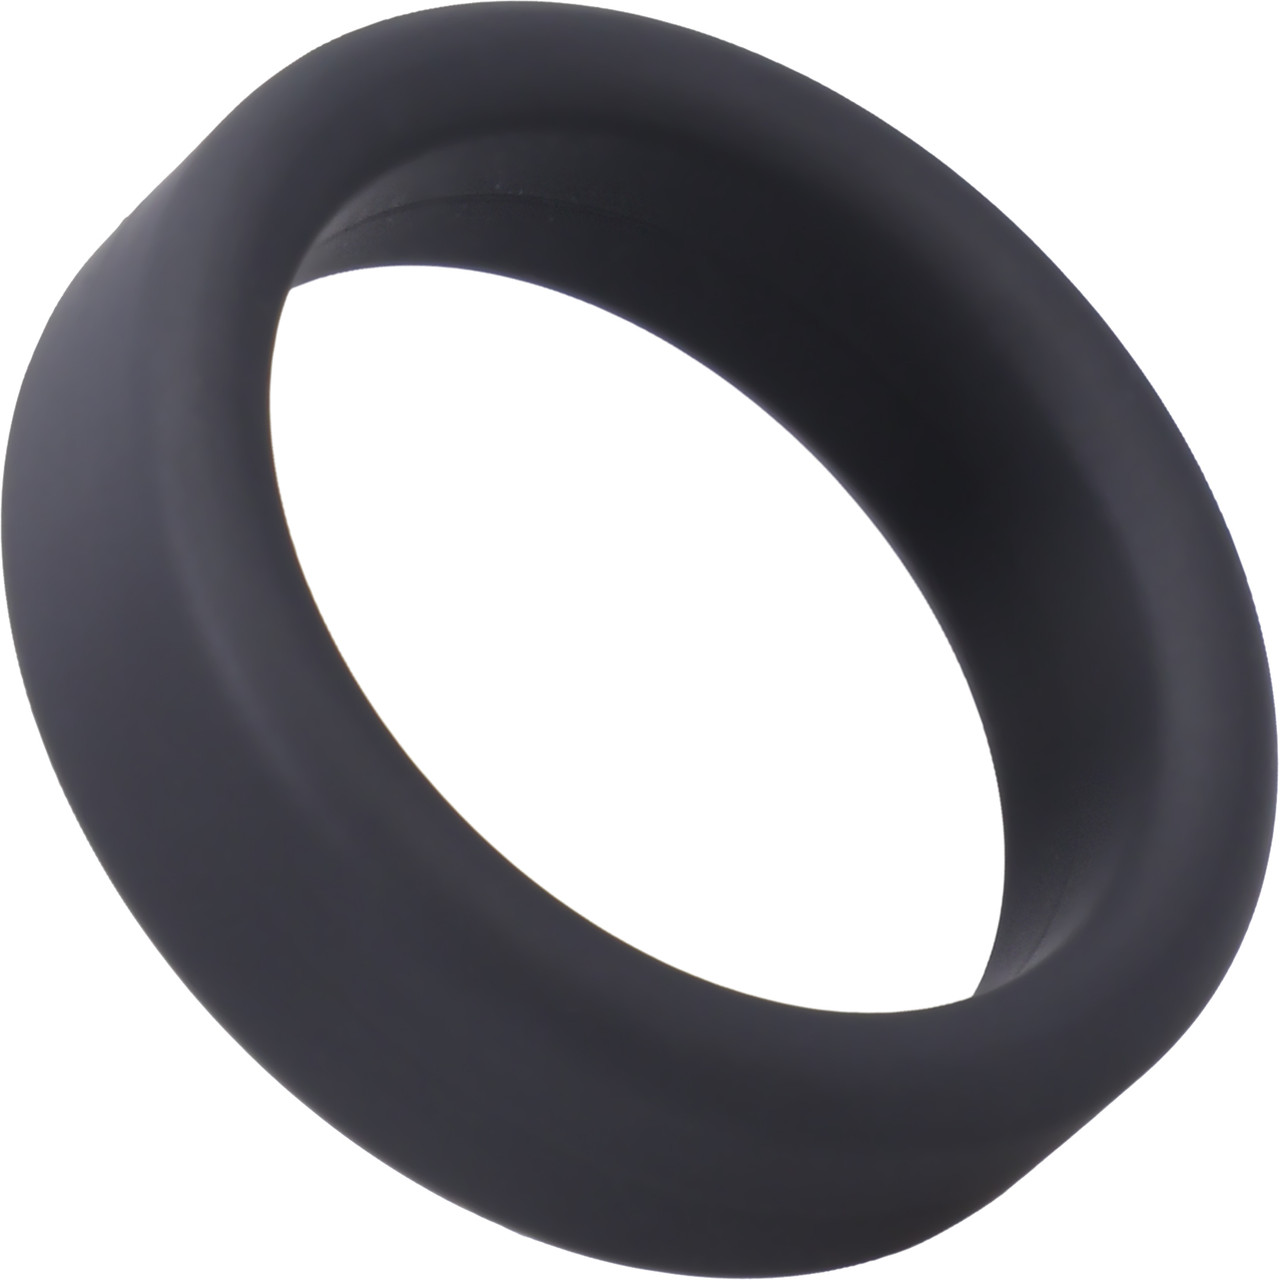 Cock Ring 10 PCS Soft Stretchy Silicone